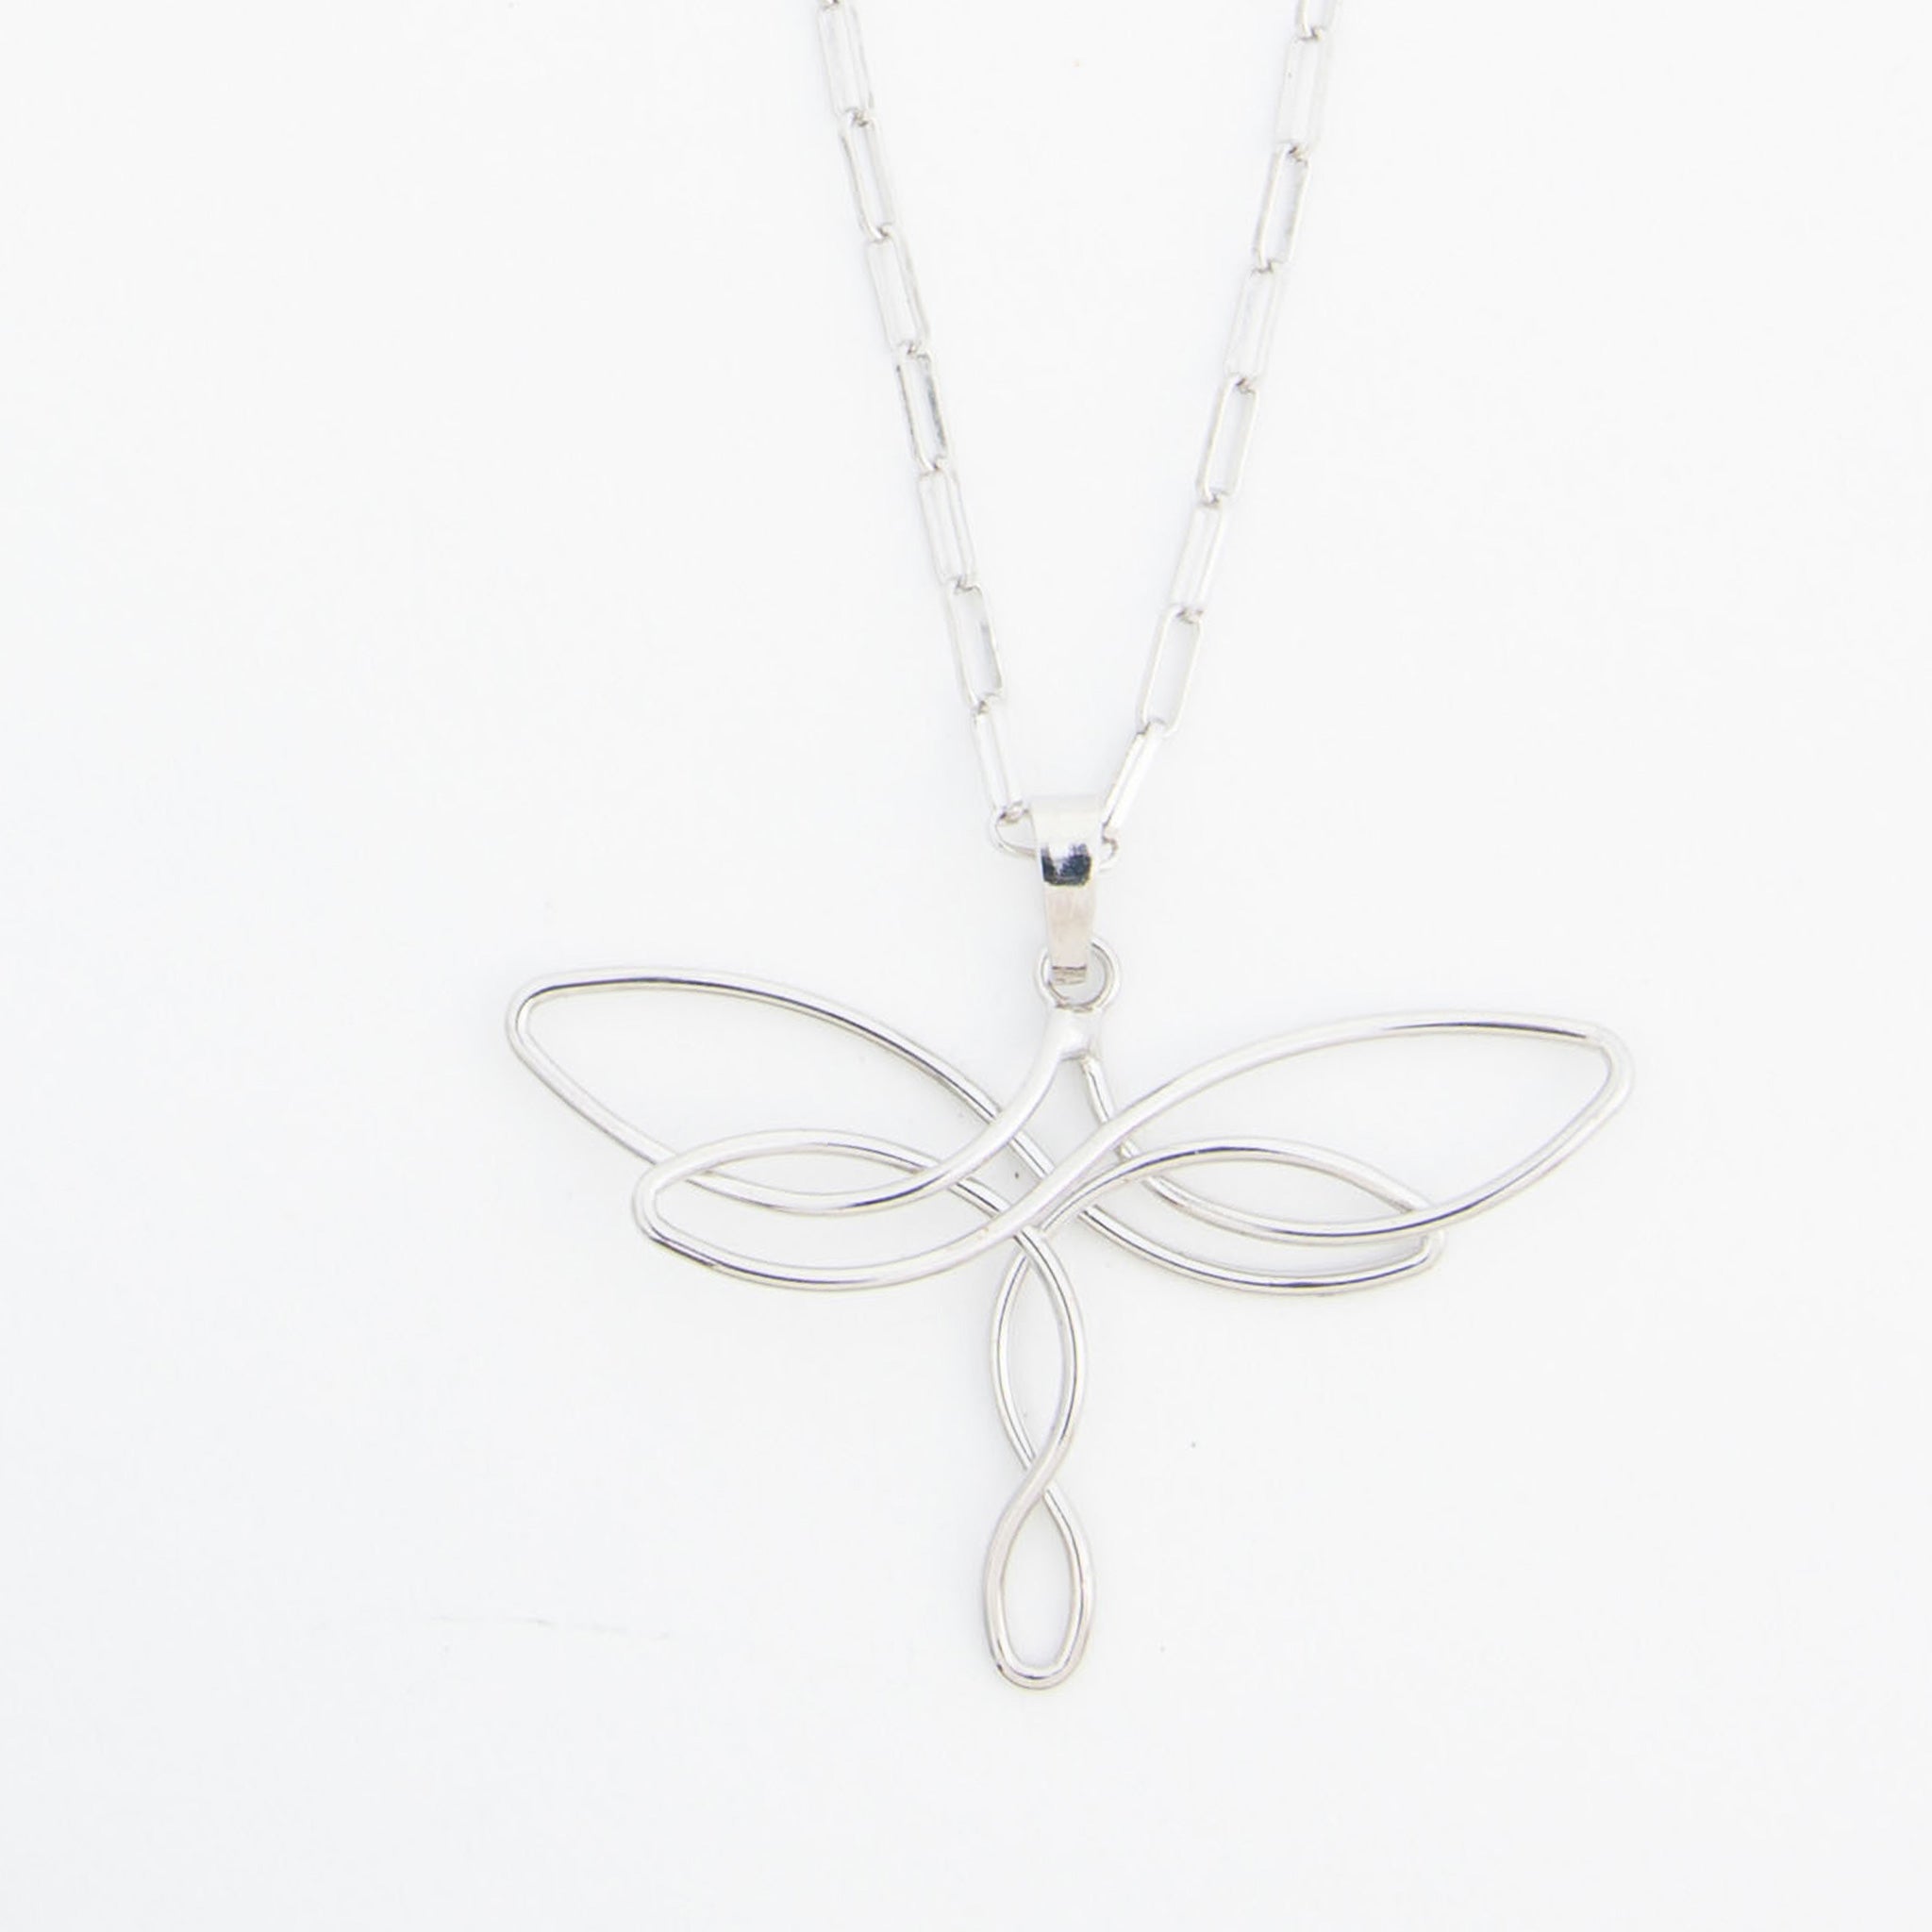 Dragonfly Necklace – The Pearl Dude